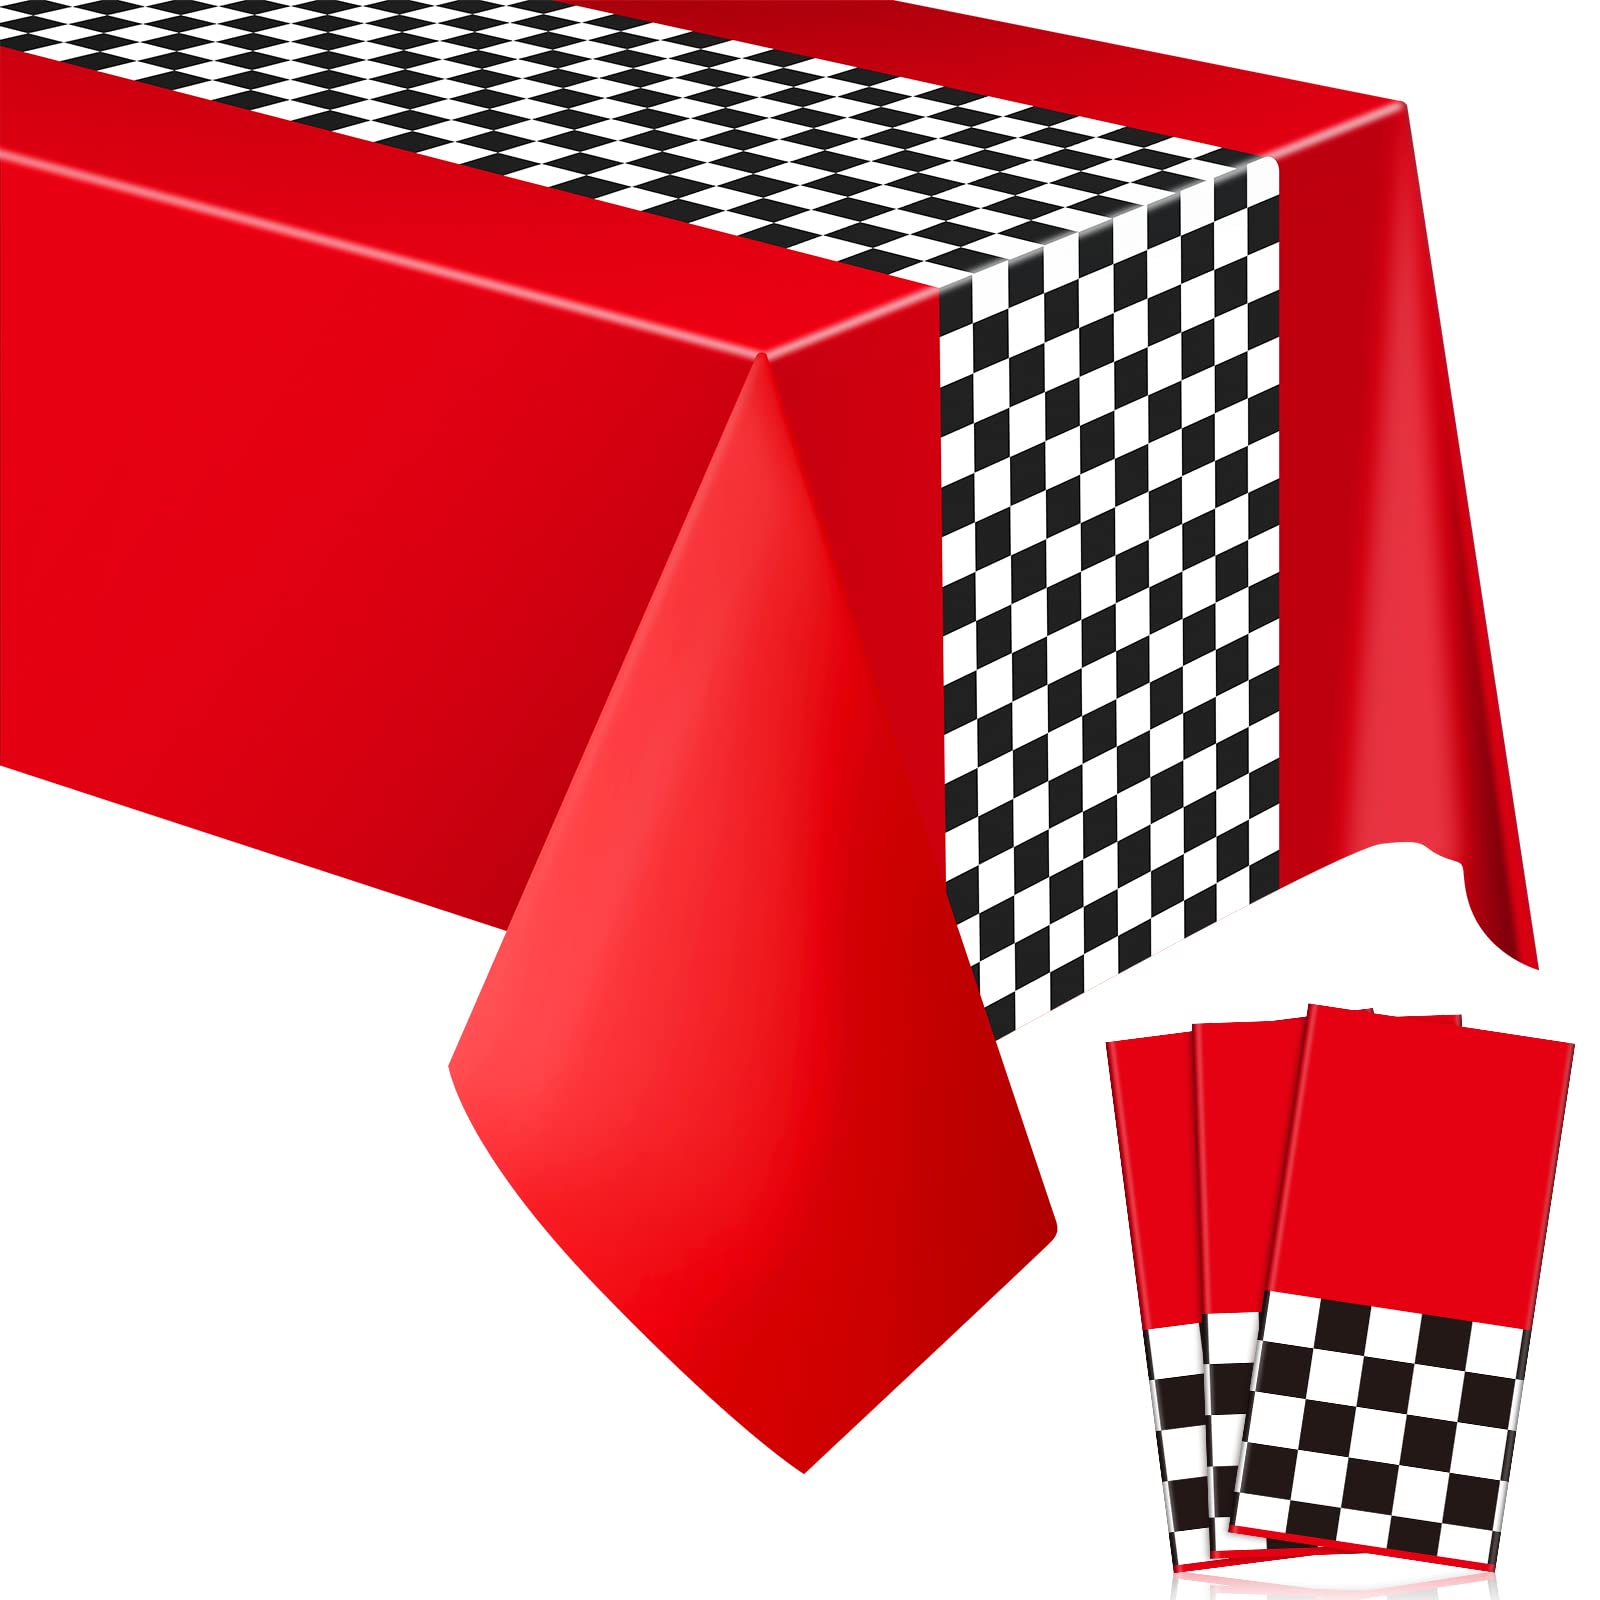 Irenare Car Birthday Party Supplies Racing Party Decorations Road Tablecloth Racetrack Table Runner Table Covers for Kids Boy Car Theme Birthday Party, 54 x 108 Inch (Red,3 Sheets)